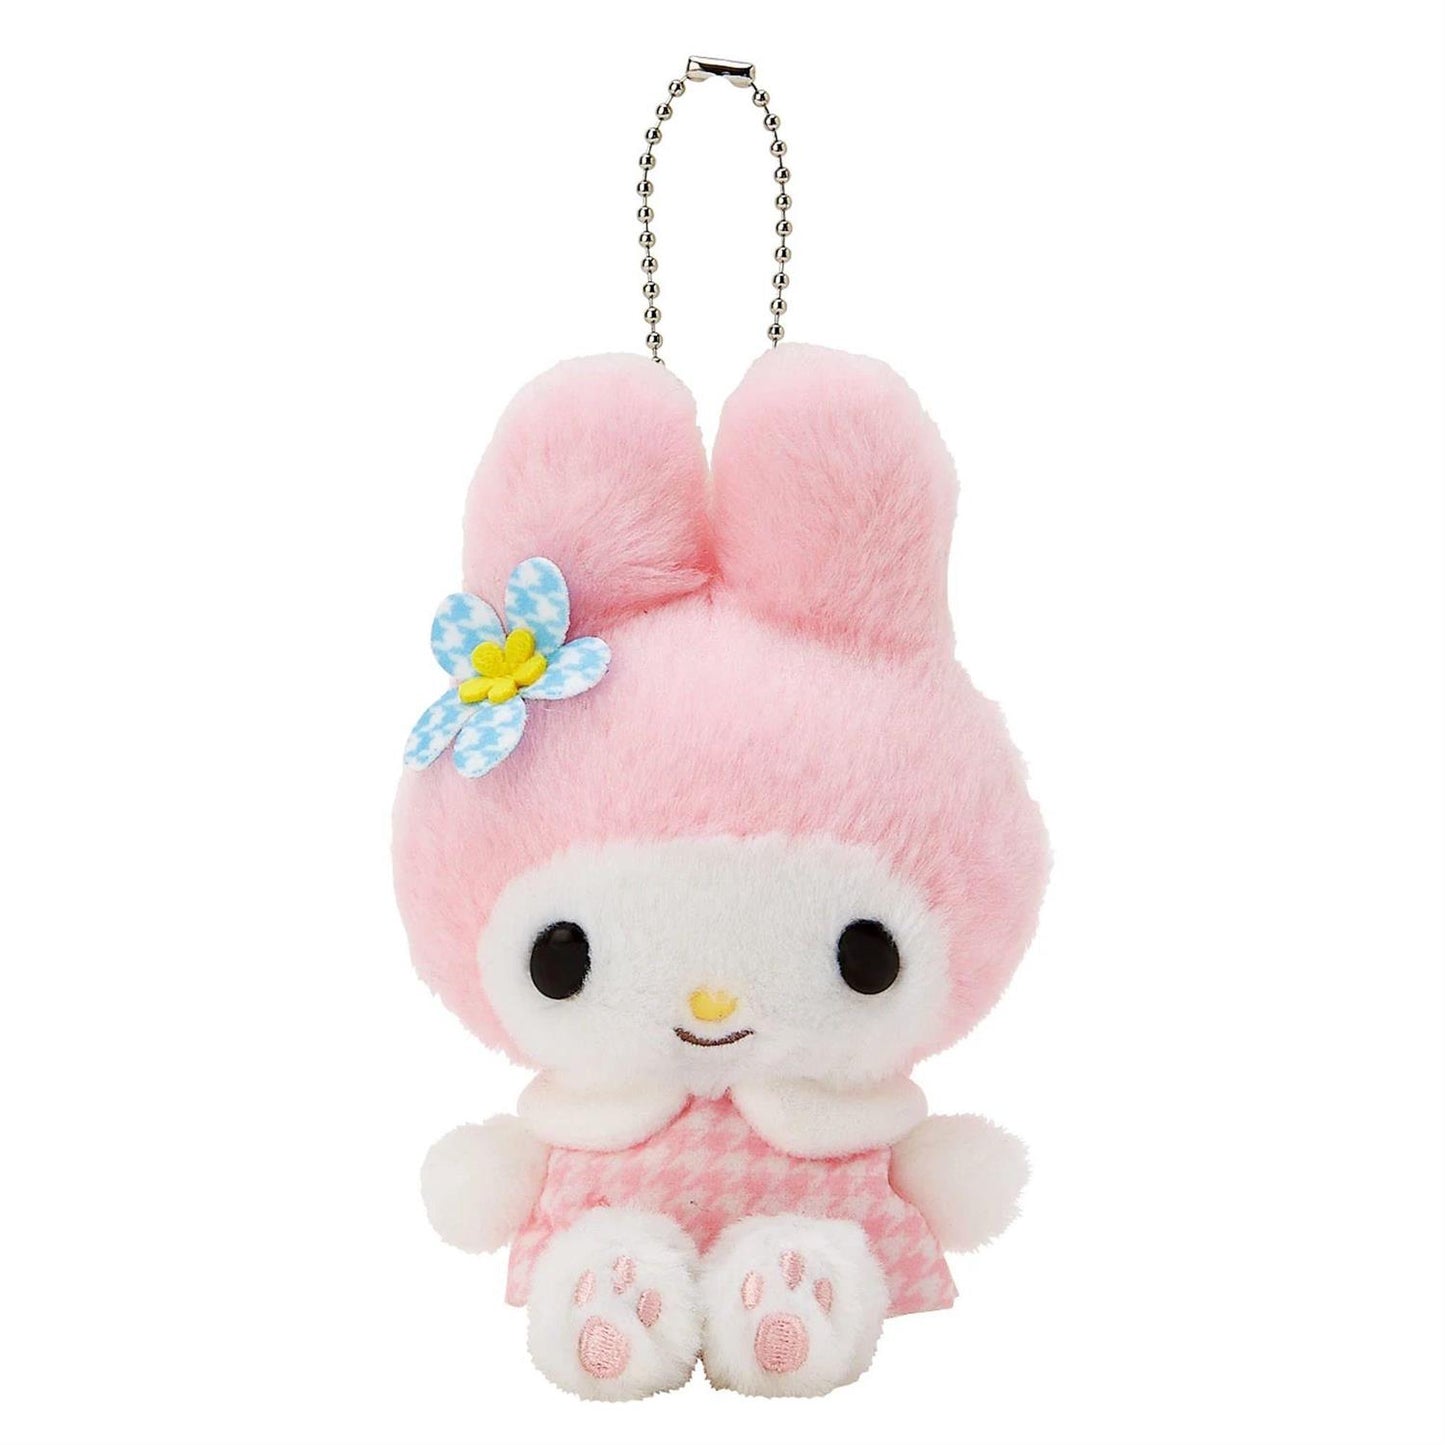 Sanrio FACE Keychain with Mascot